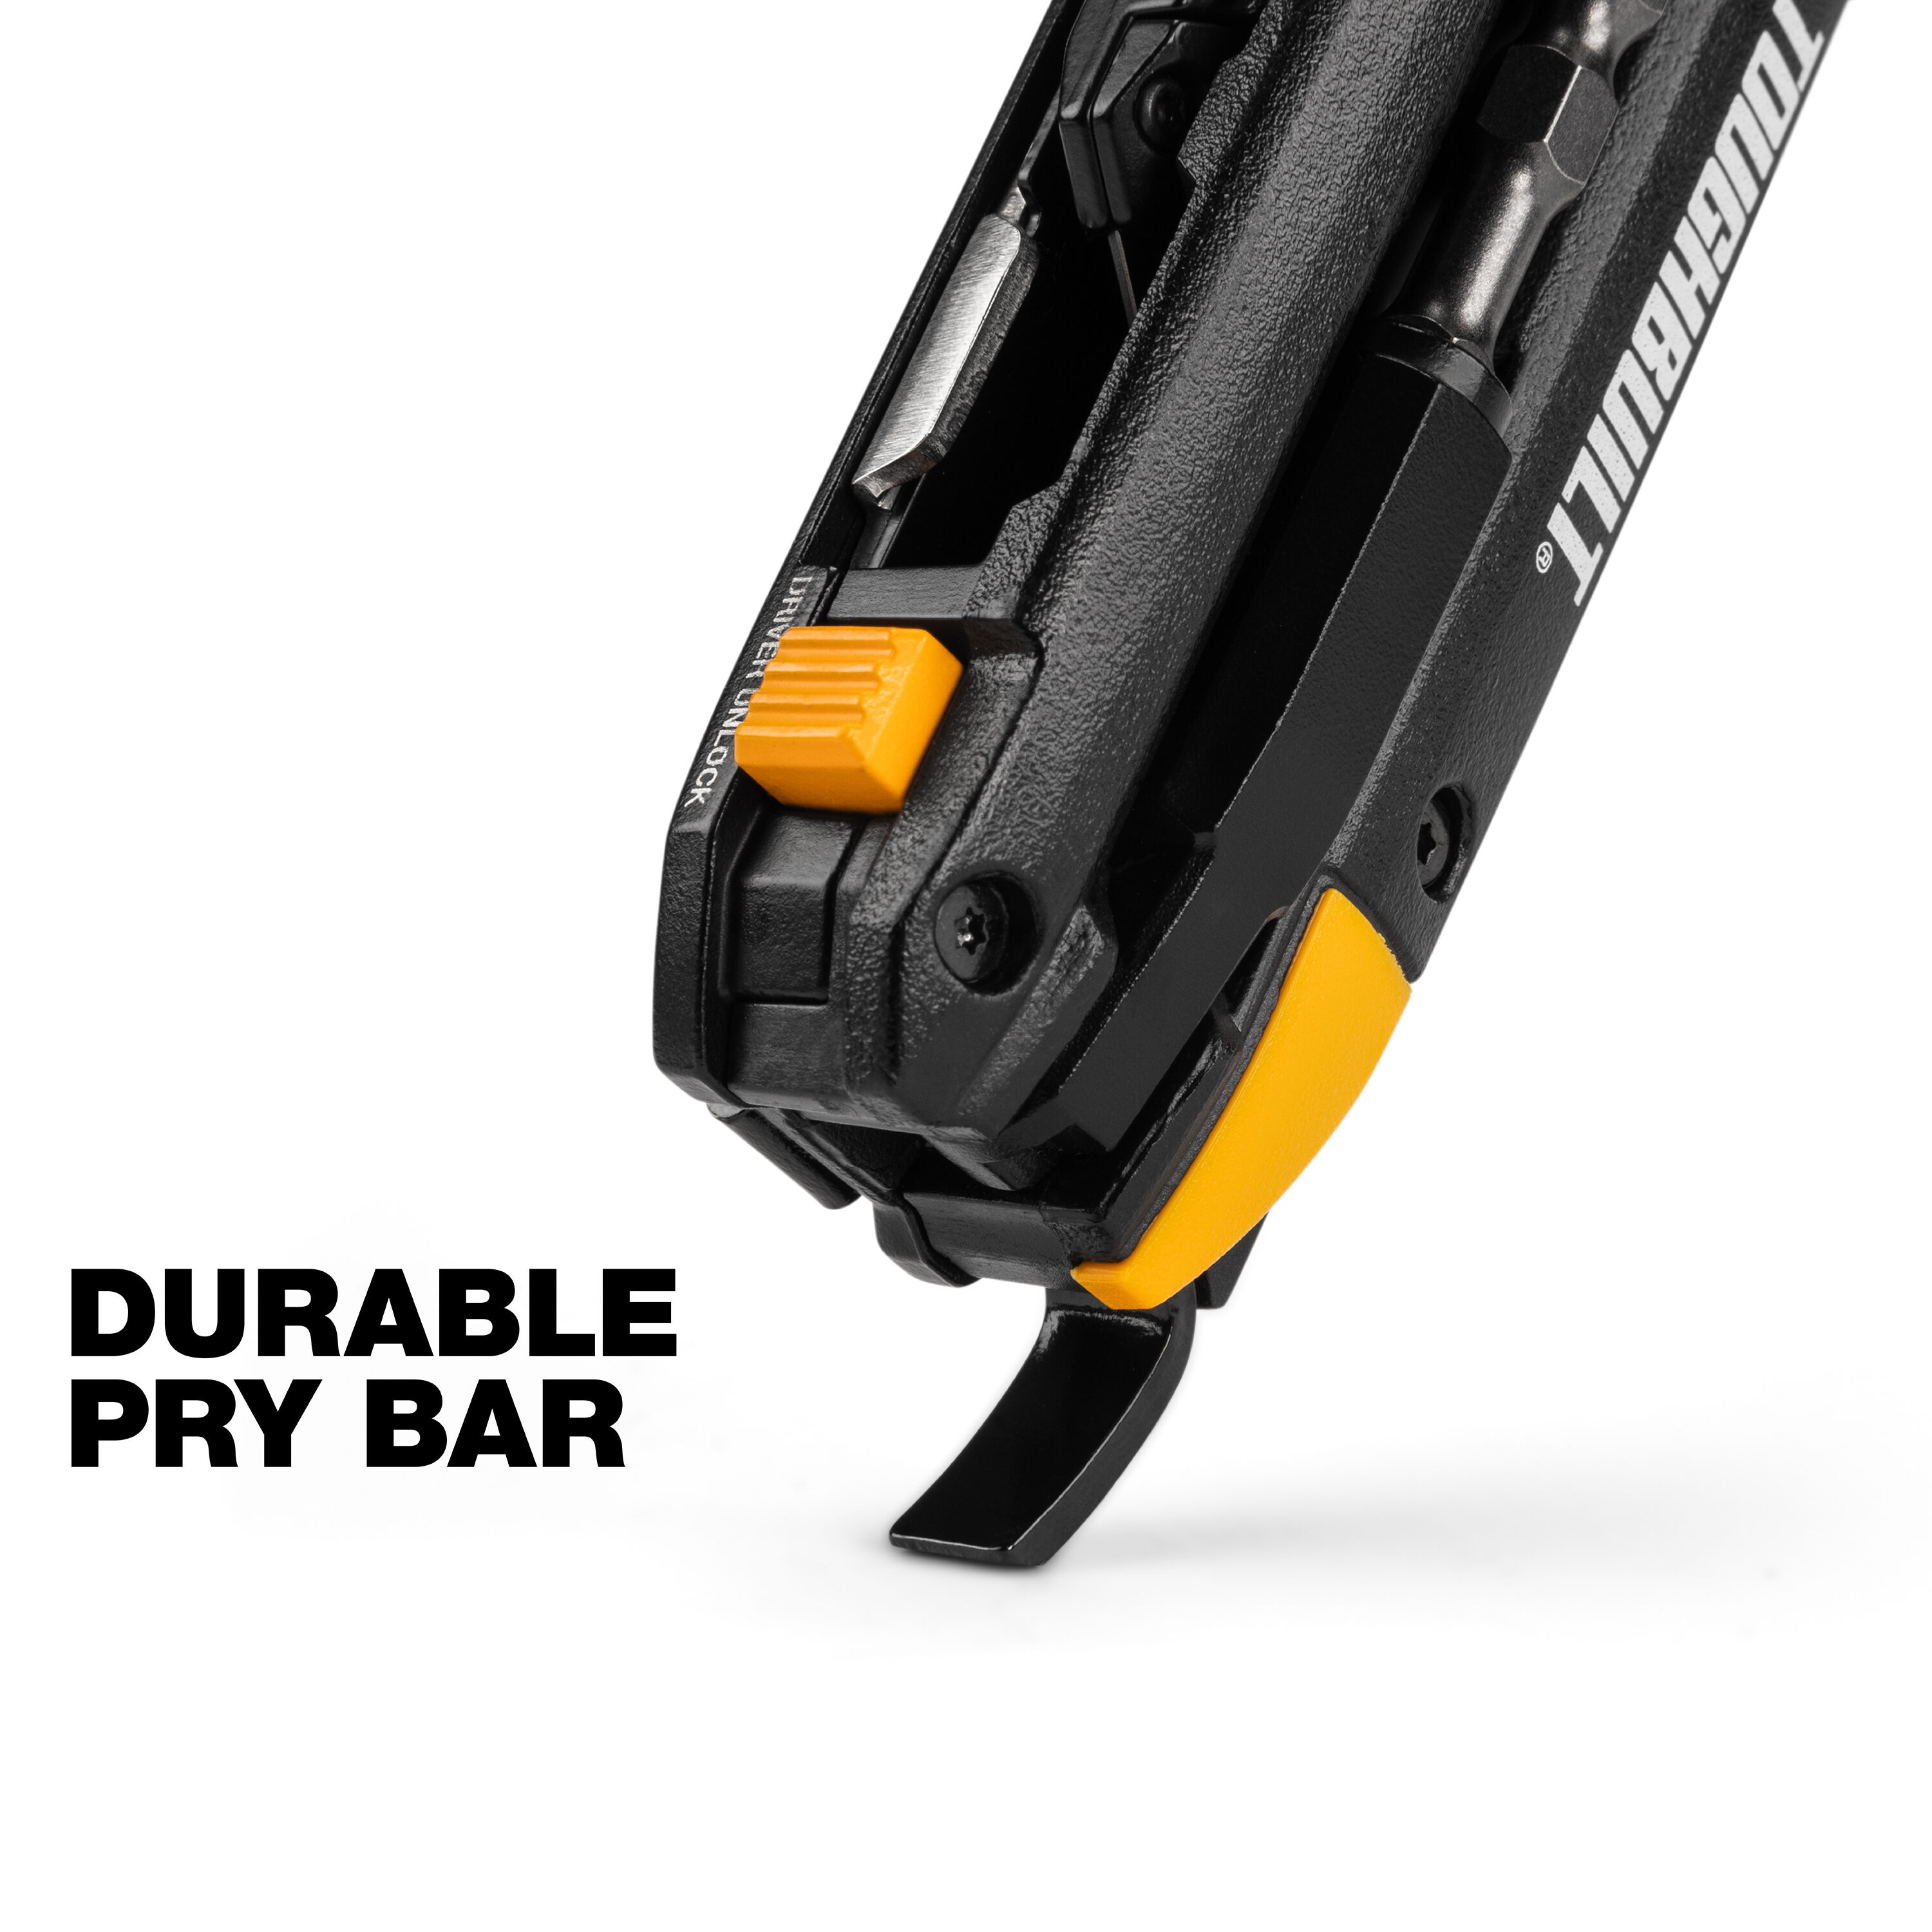 TOUGHBUILT 5-in-1 Electrician's 3/4-in 3-Blade Folding Utility Knife with  On Tool Blade Storage